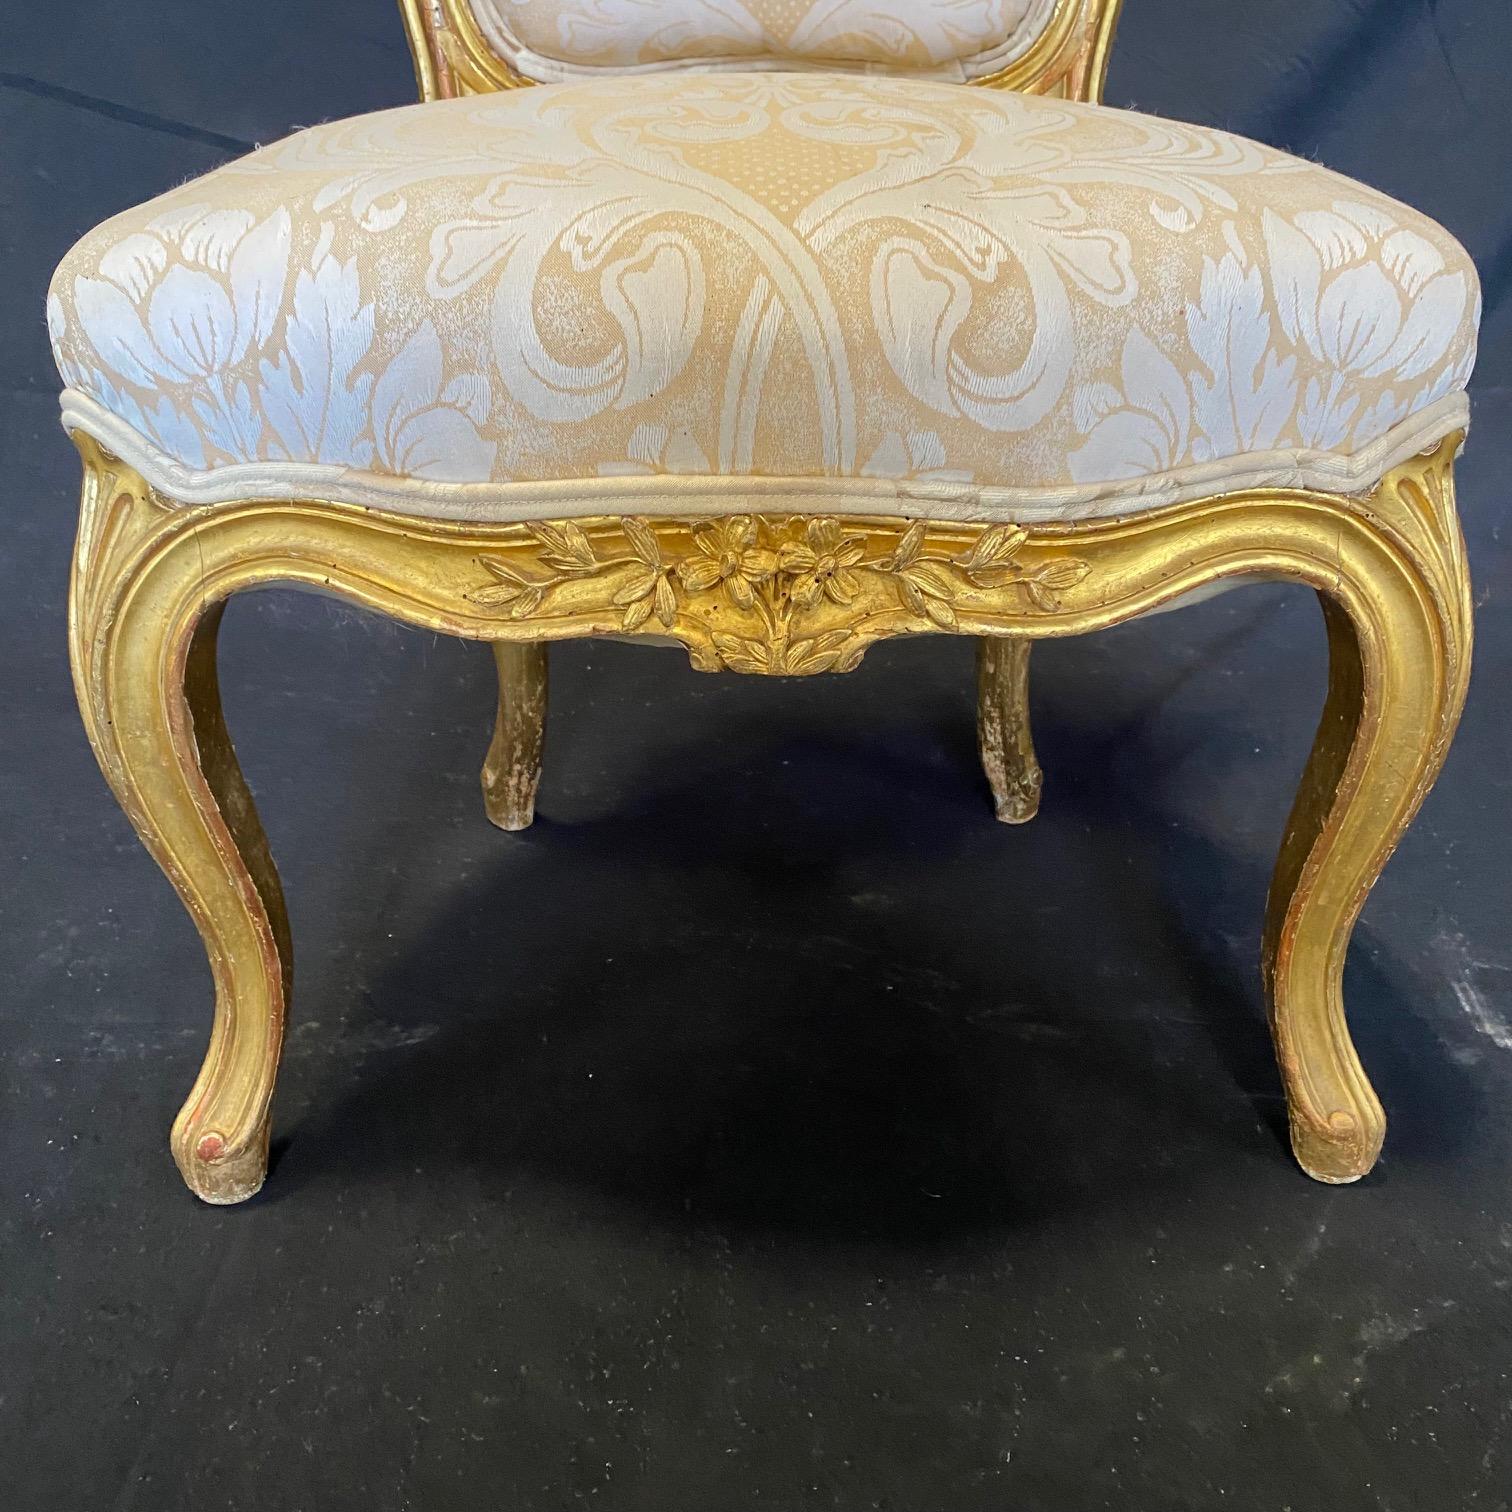 Really lovely pair of French Louis XV giltwood antique slipper chairs with intricate floral carving on the apron and top of backrest. The single window pane on the back is a nice touch. #2255